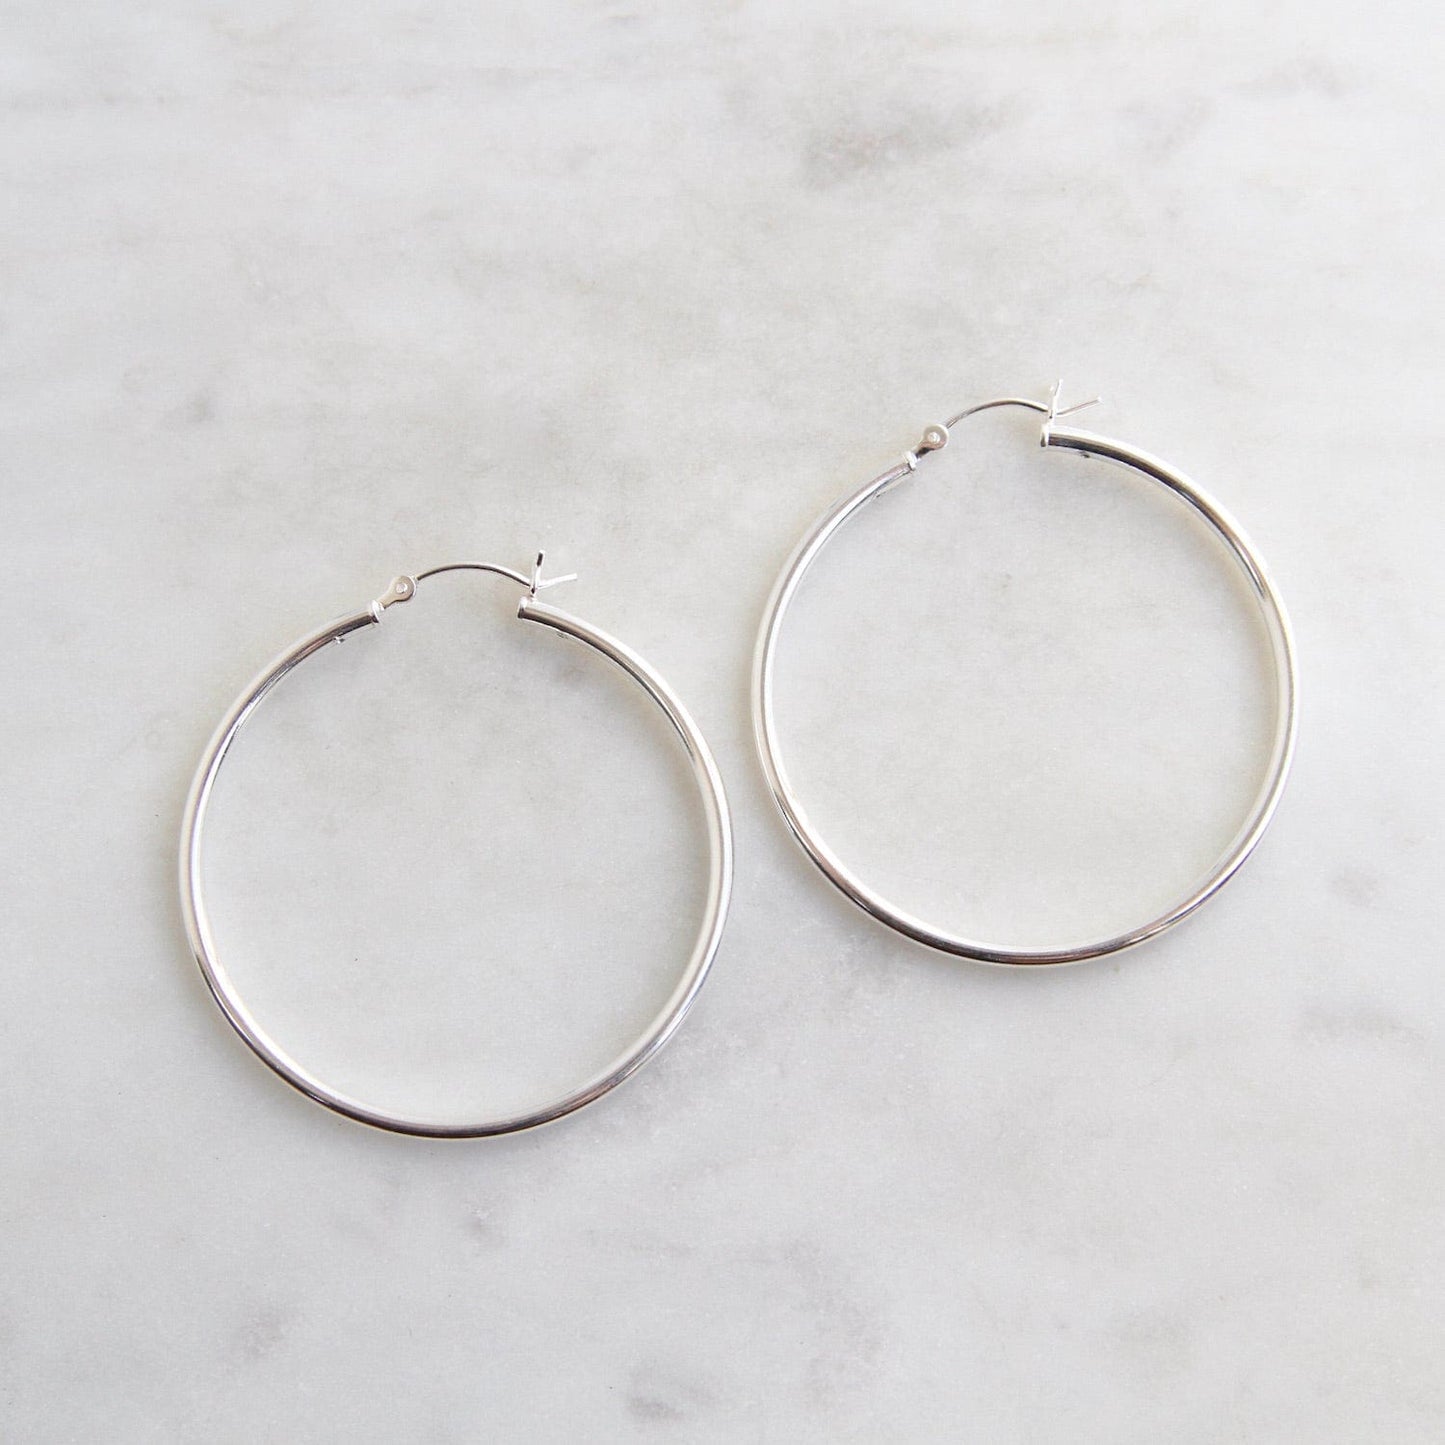 EAR Thick 40mm Sterling Silver Tube Hoop